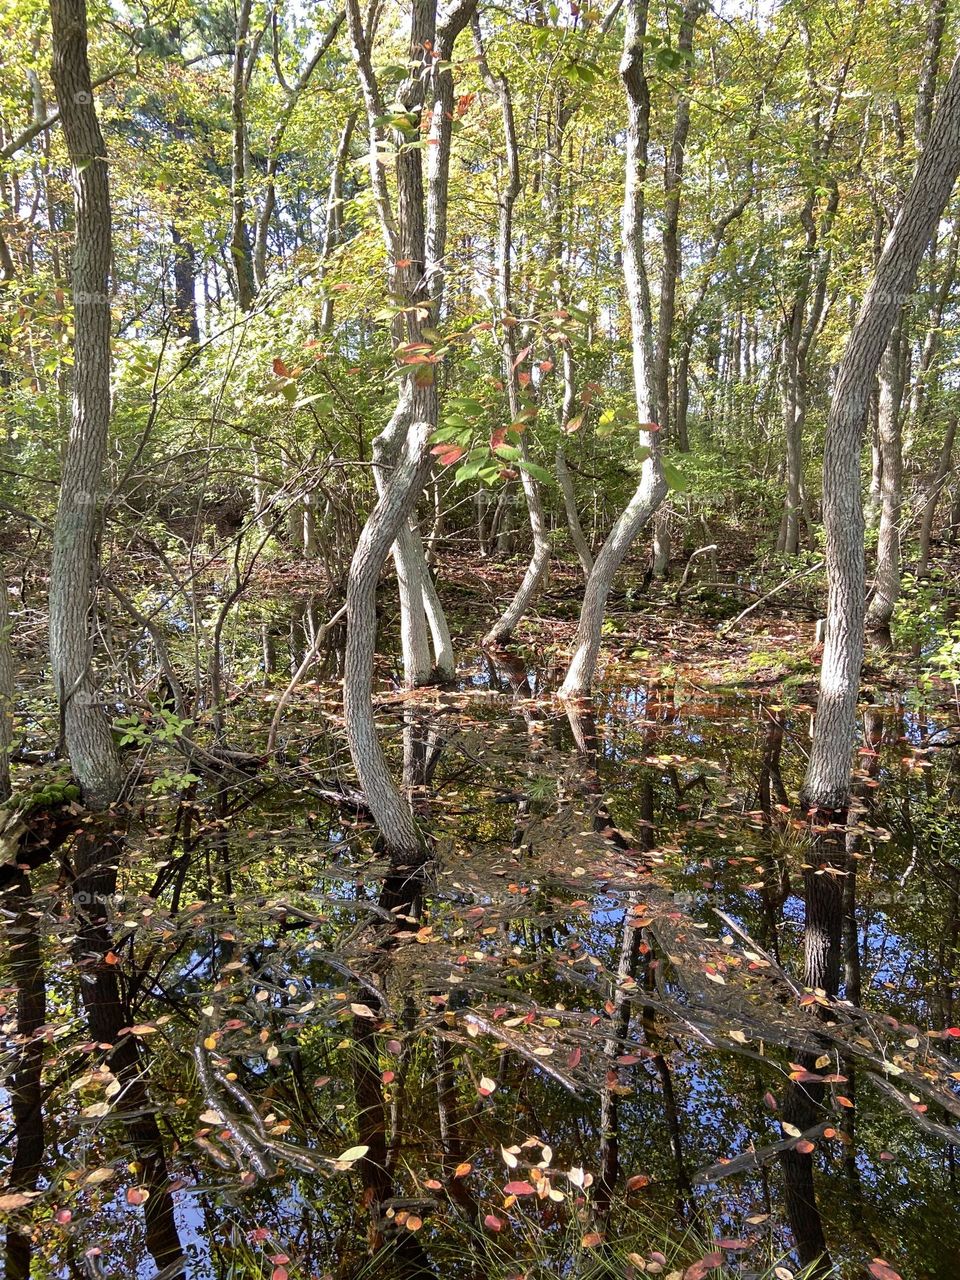 The maritime forest at Cattus Island County Park in Toms River, NJ. This was taken after a period of heavy rain. I had never seen so much water beneath the trees at the starting point of the walking trail, but I thought it looked beautiful. 